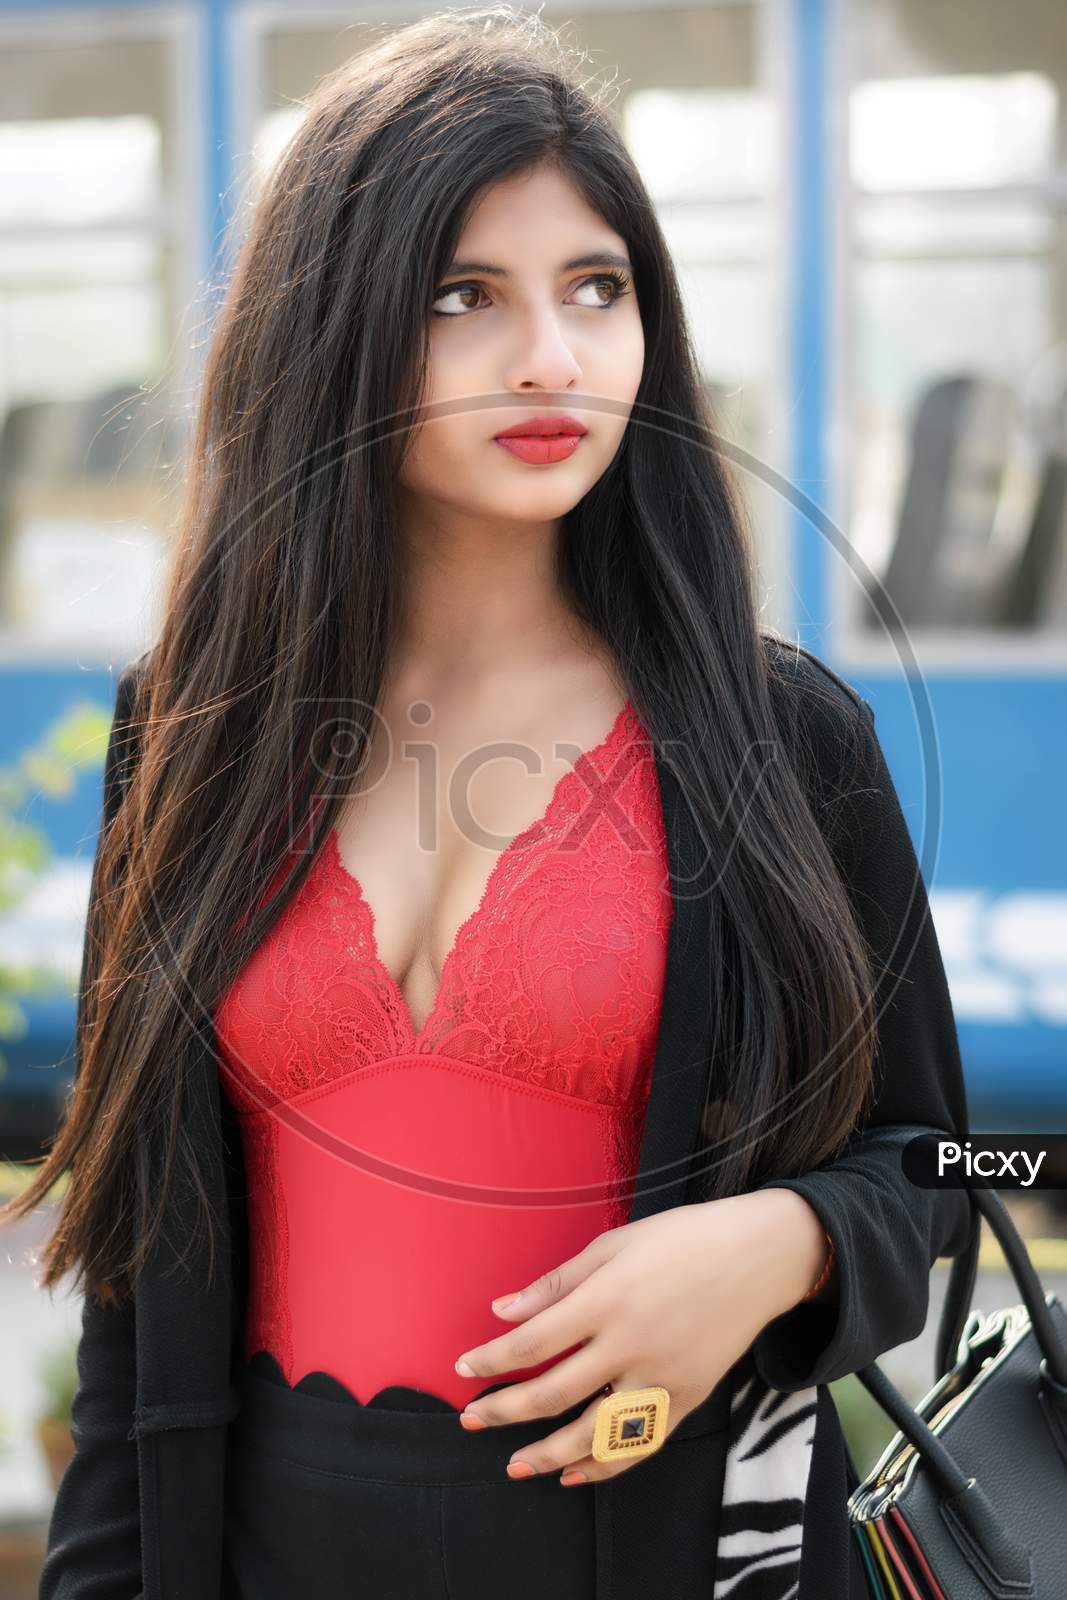 Portrait Of Very Beautiful Straight Haired Young Attractive Indian Woman Wearing Red Outfit With Black Jacket Posing Fashionable In A Blurred Background. Lifestyle And Fashion.